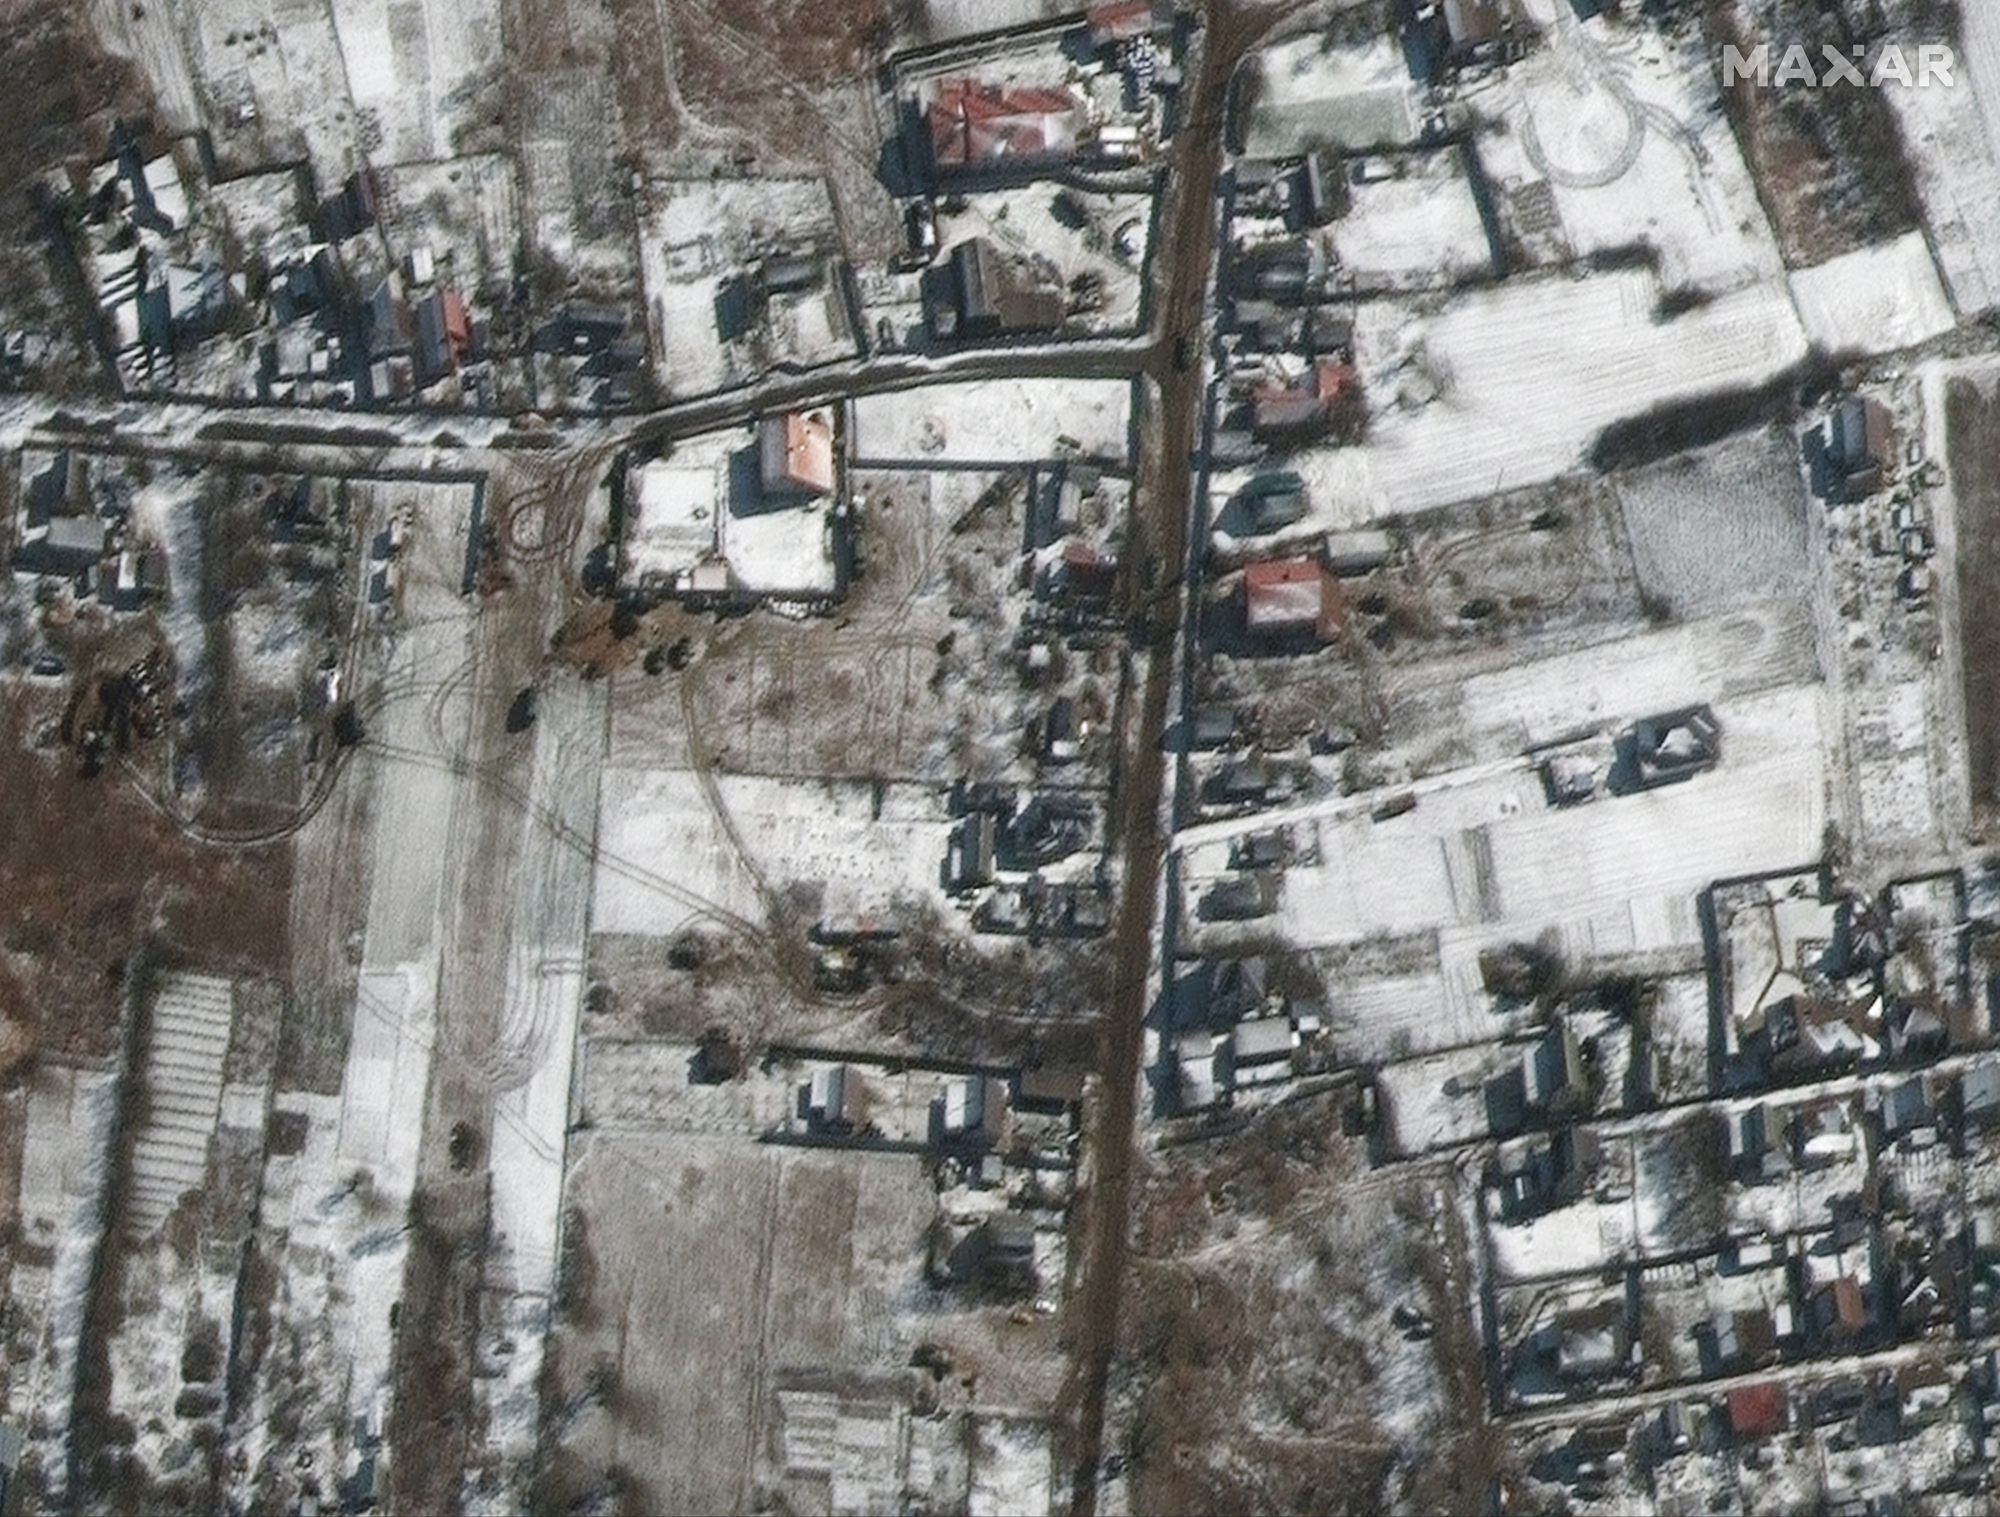 Troops and military vehicles deployed in Ozera, northeast of Antonov Airport near Kyiv, Ukraine are visible in this Maxar satellite image taken on March 10, 2022.